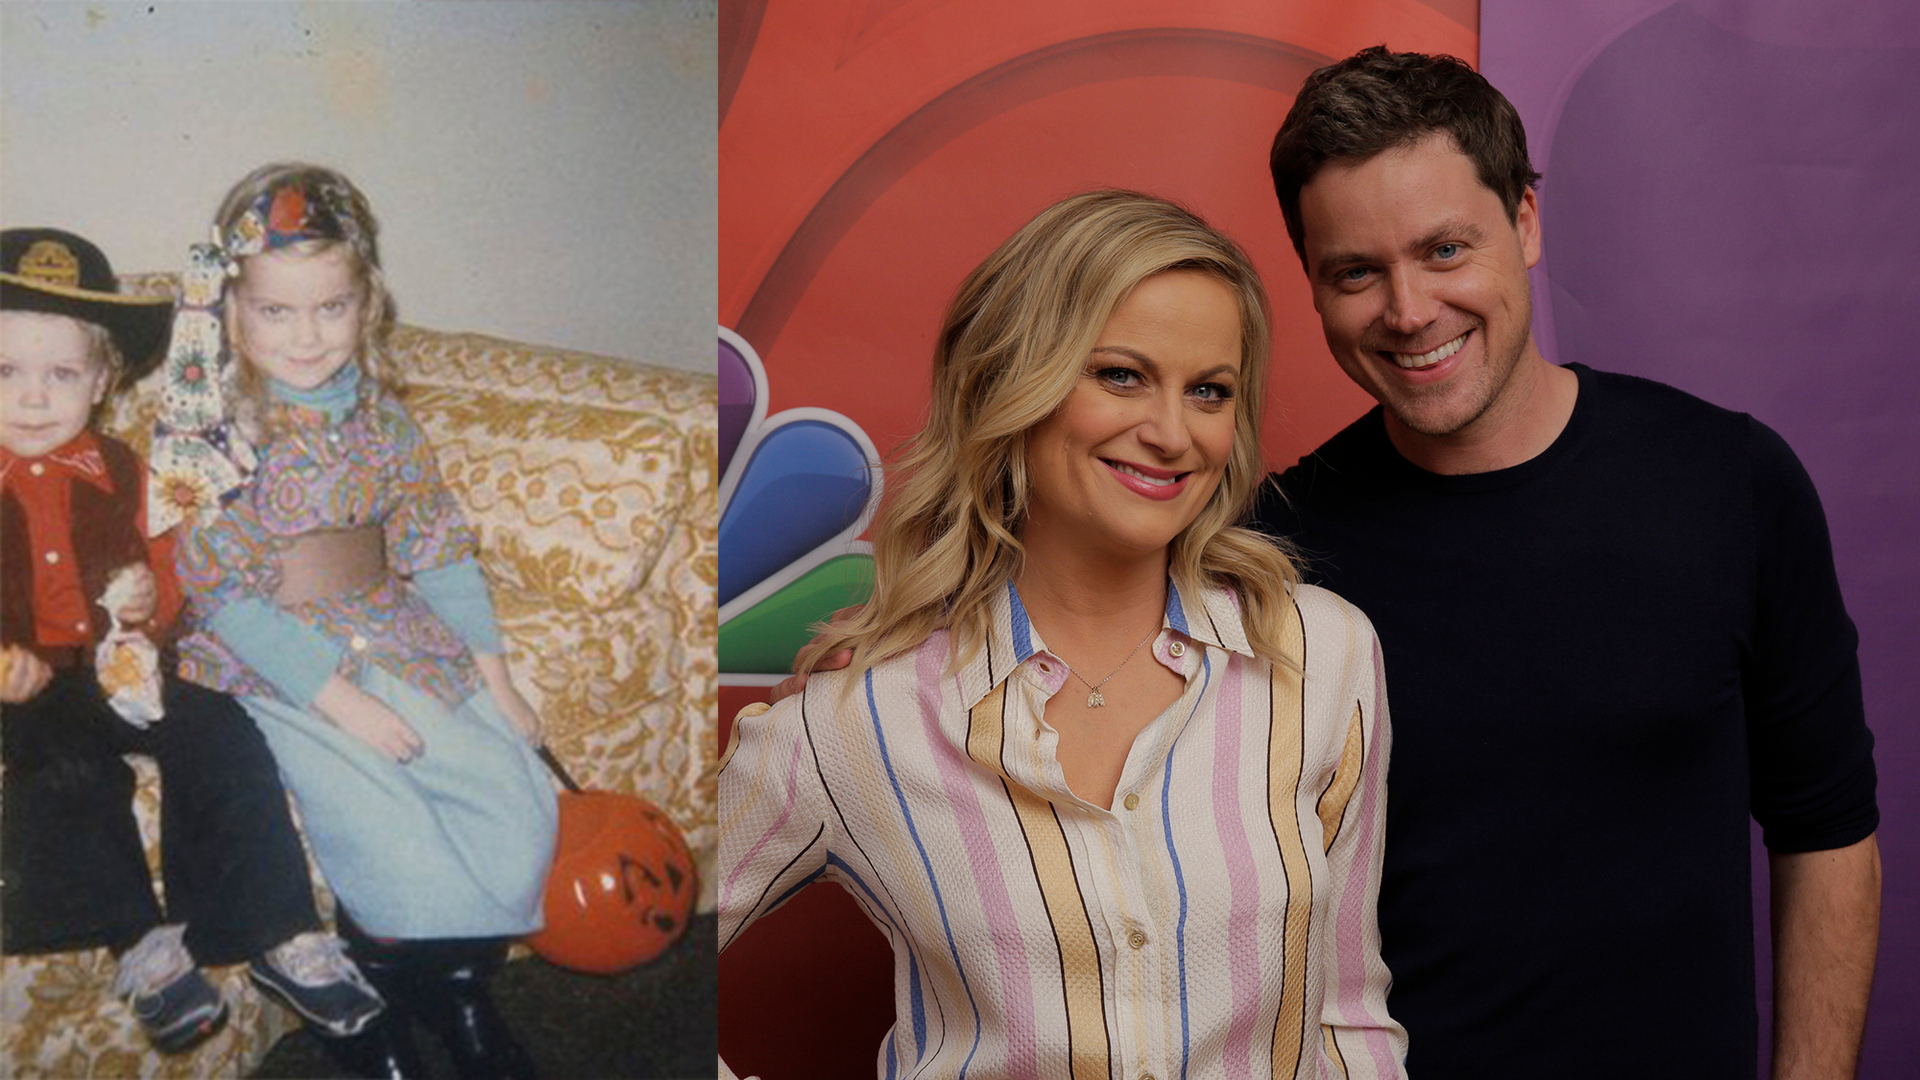 Amy Poehler with her brother in childhood and now